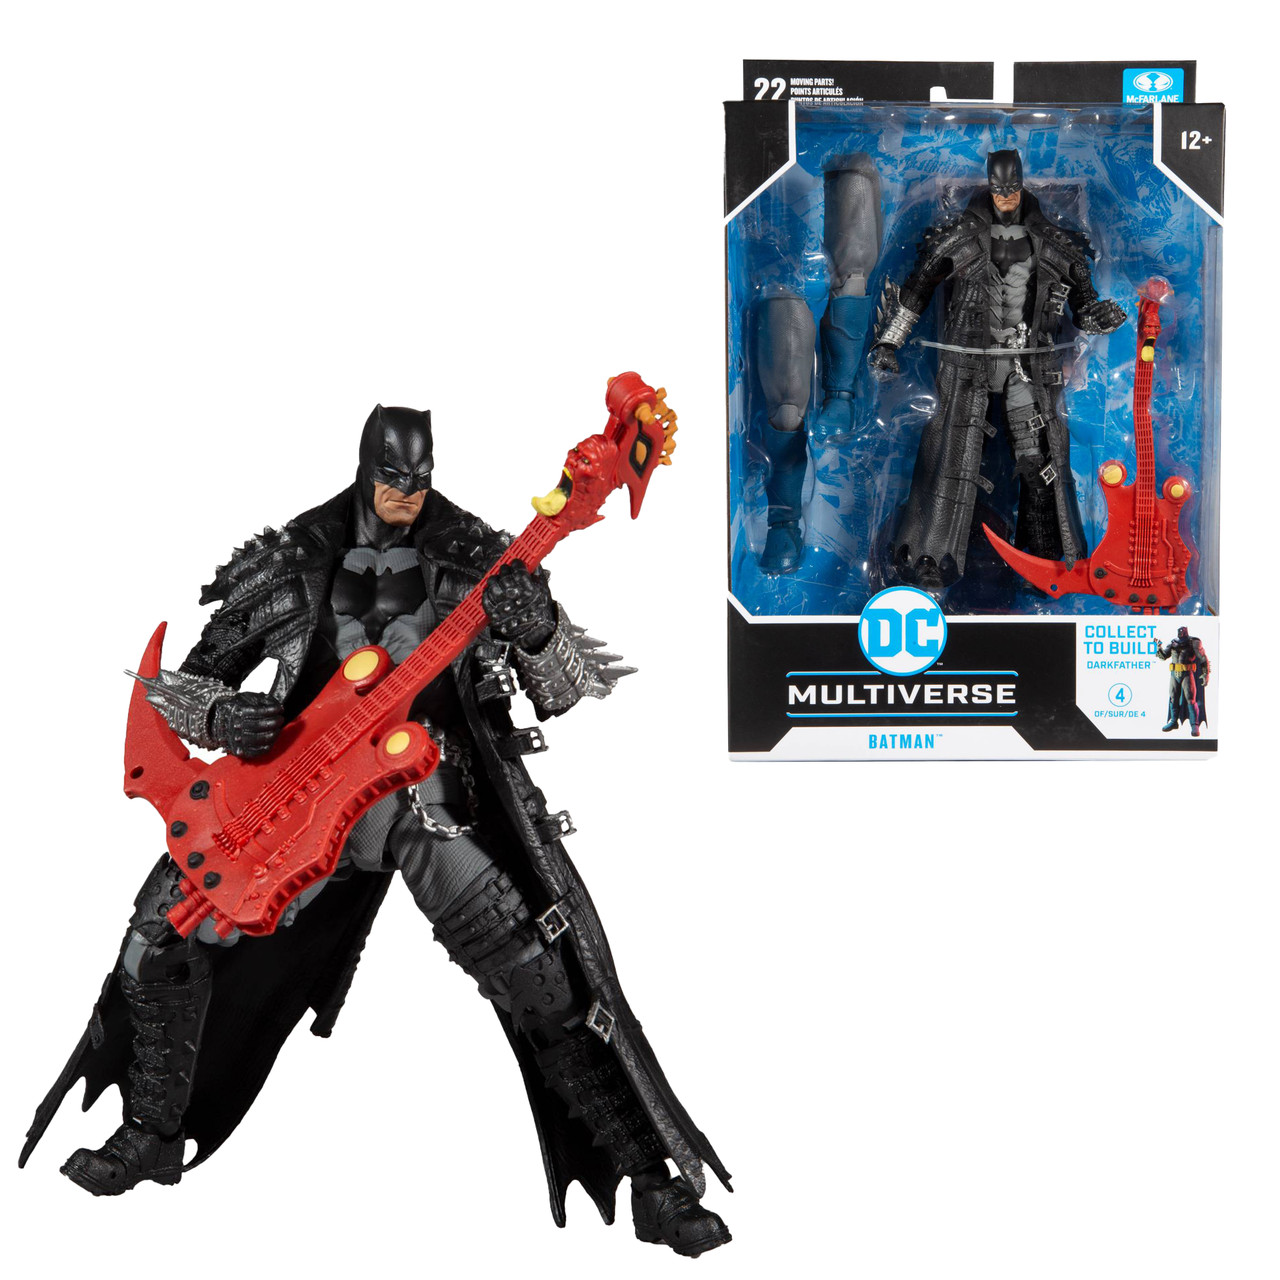 Guitar Hero Figures by McFarlane Toys, These are the new Gu…